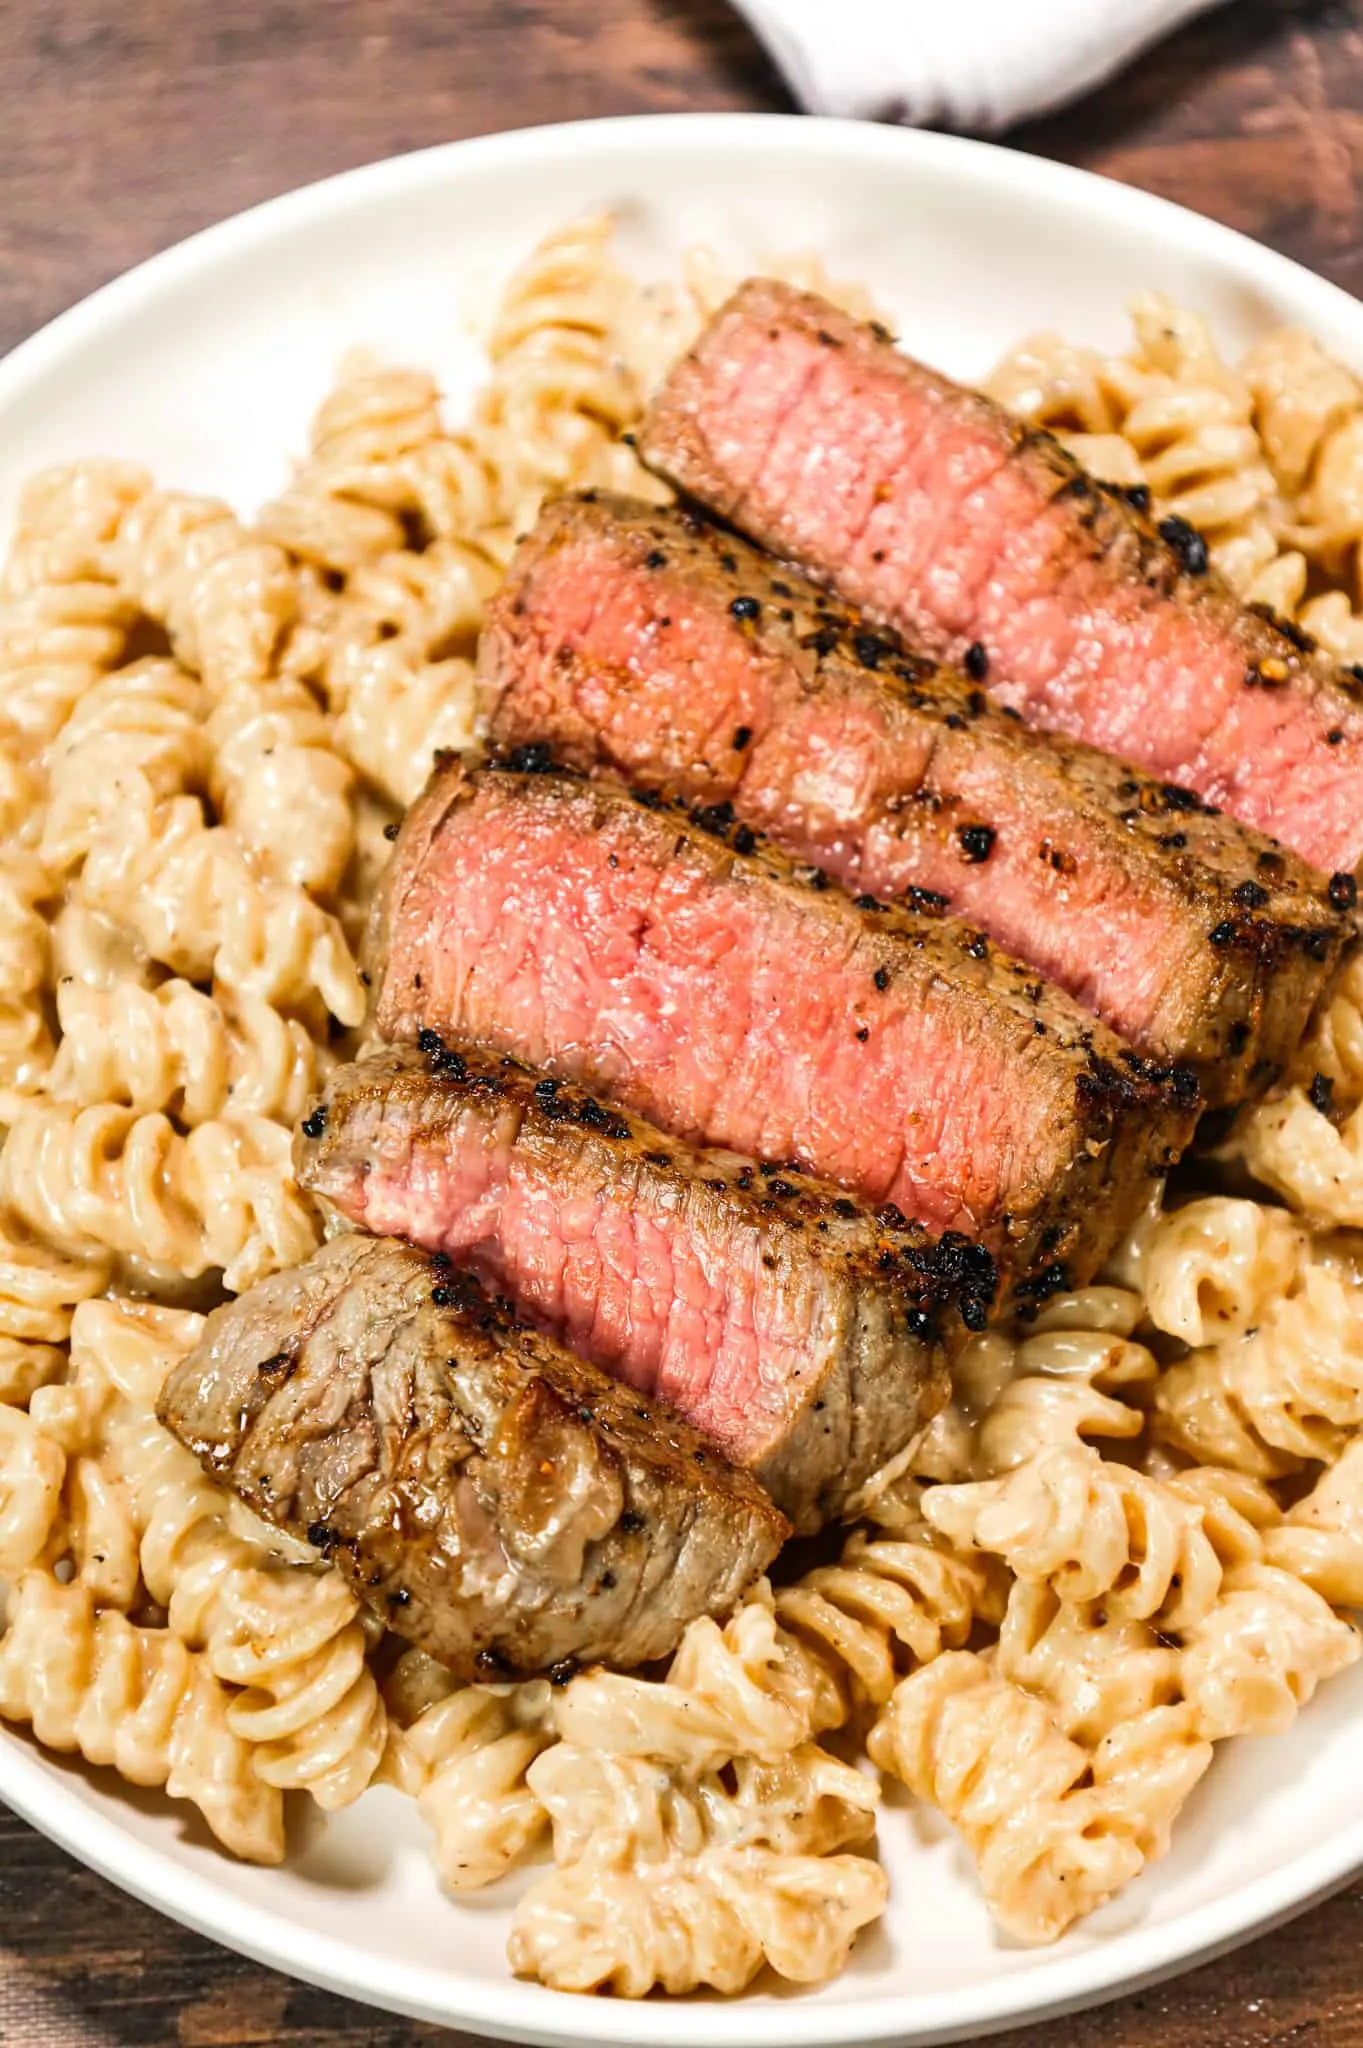 Steak Alfredo is an easy dinner recipe with creamy garlic parmesan pasta topped with tender slices of eye of round steak.